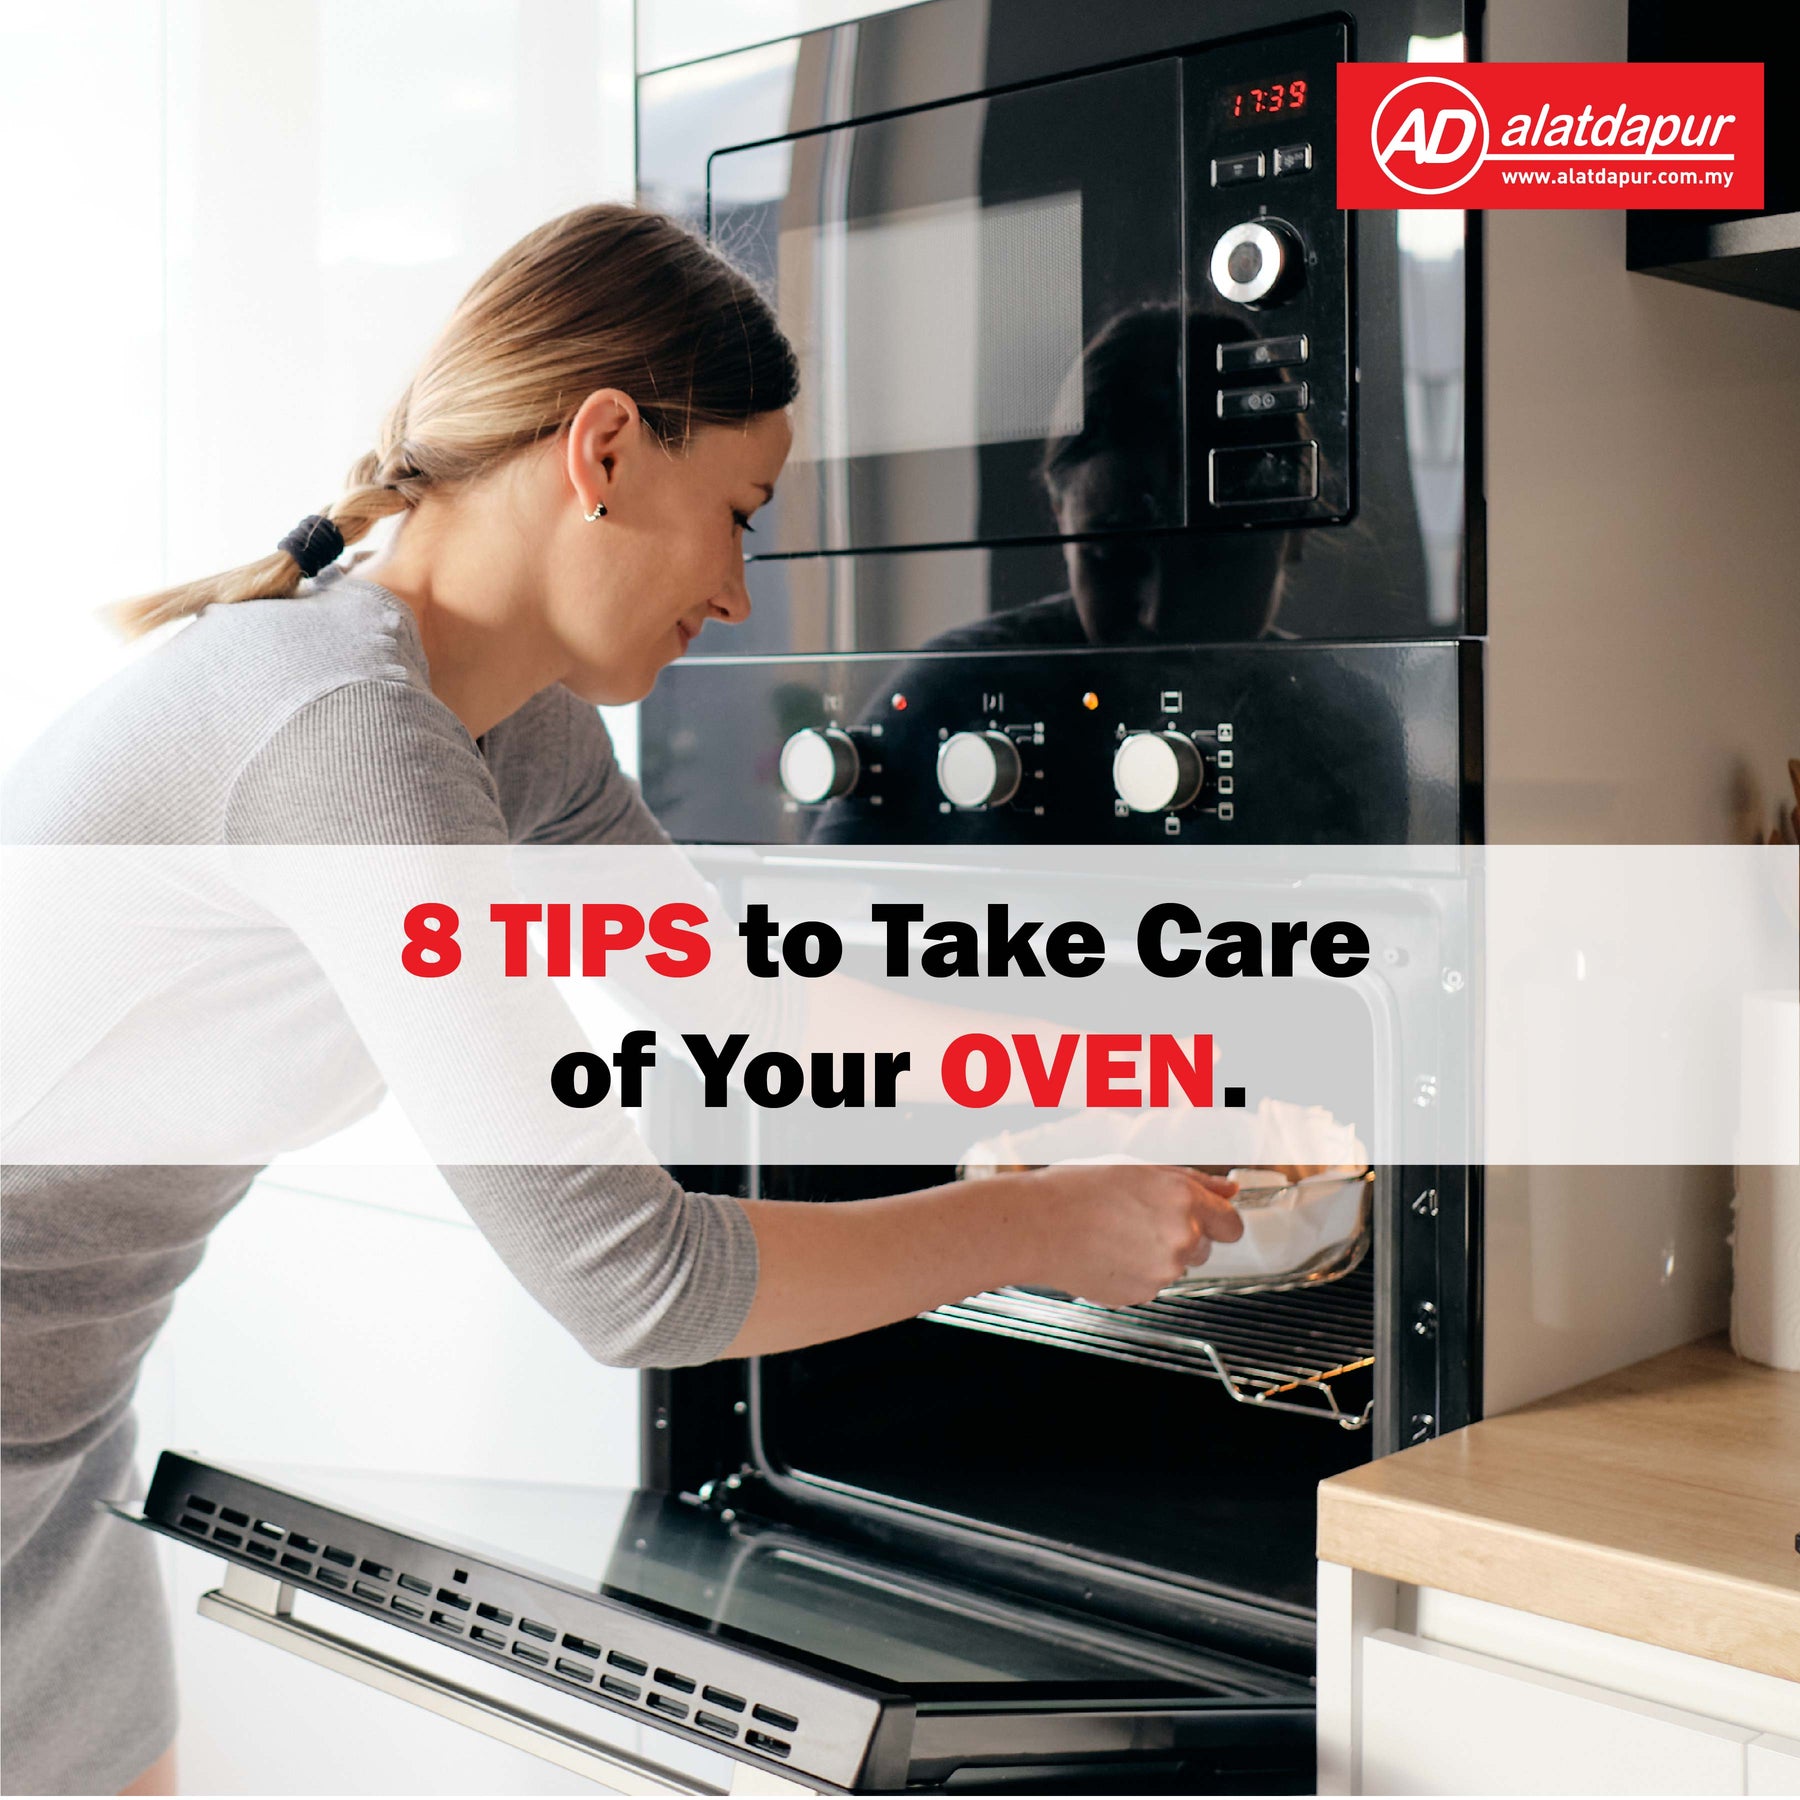 8 Tips to Take Care of Your Oven.